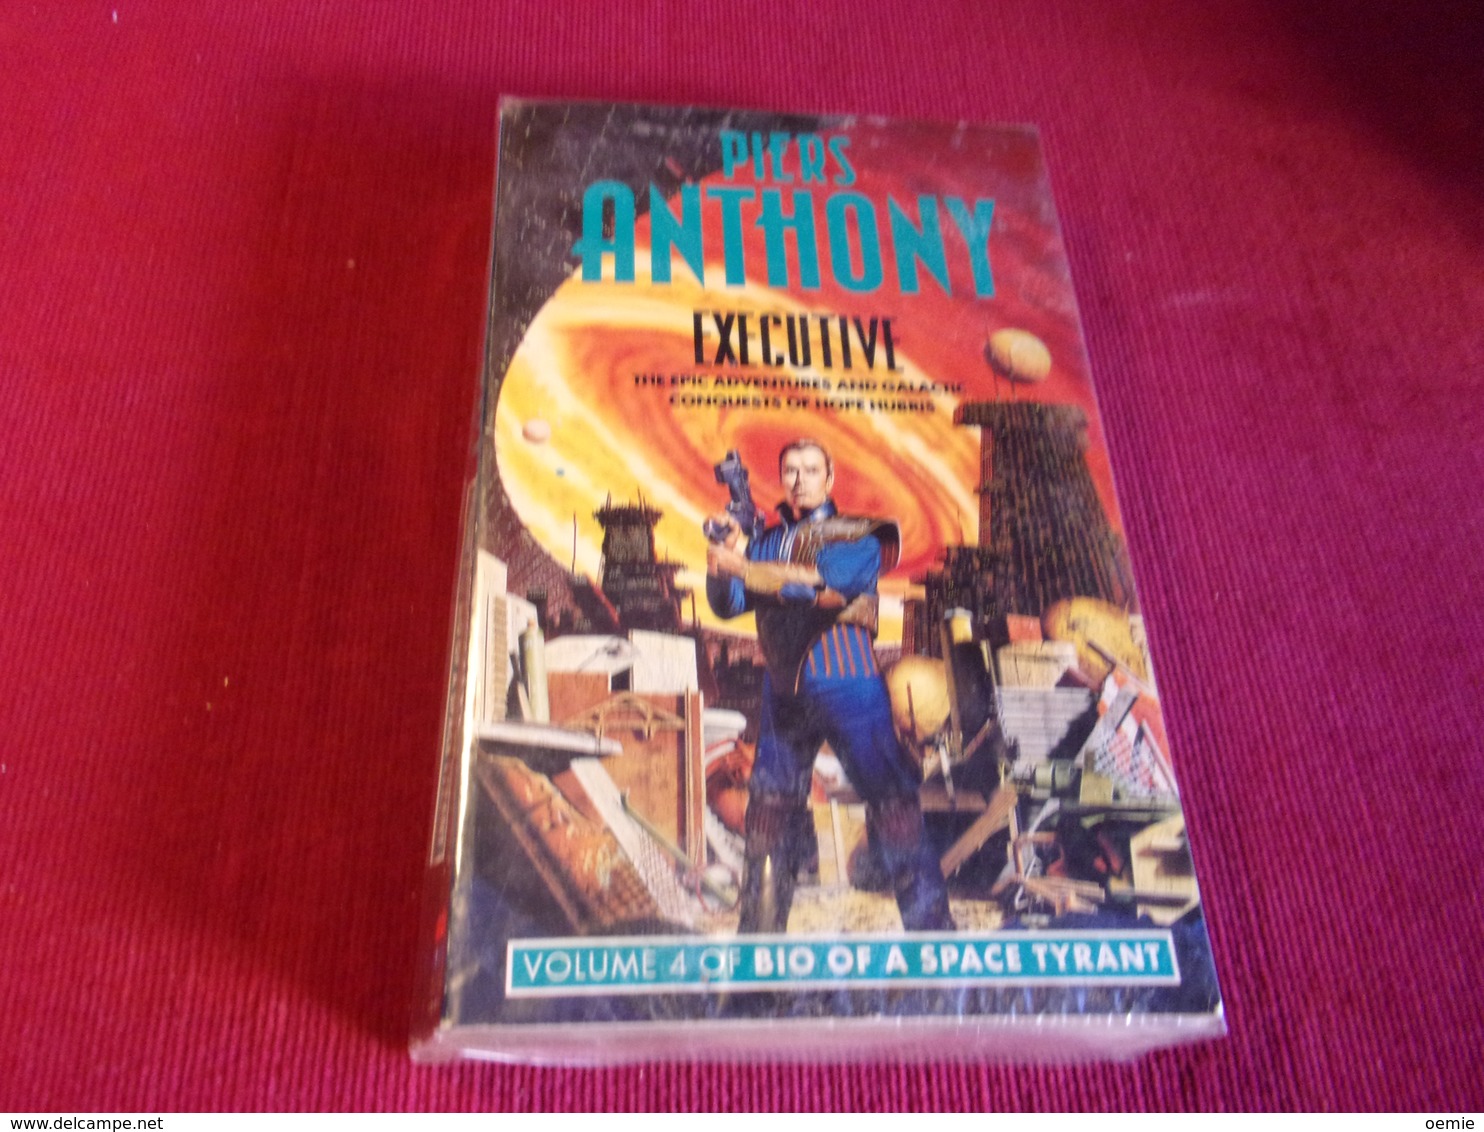 EXECUTIVE  VOLUME 4  °°°° PIERS ANTHONY - Science Fiction